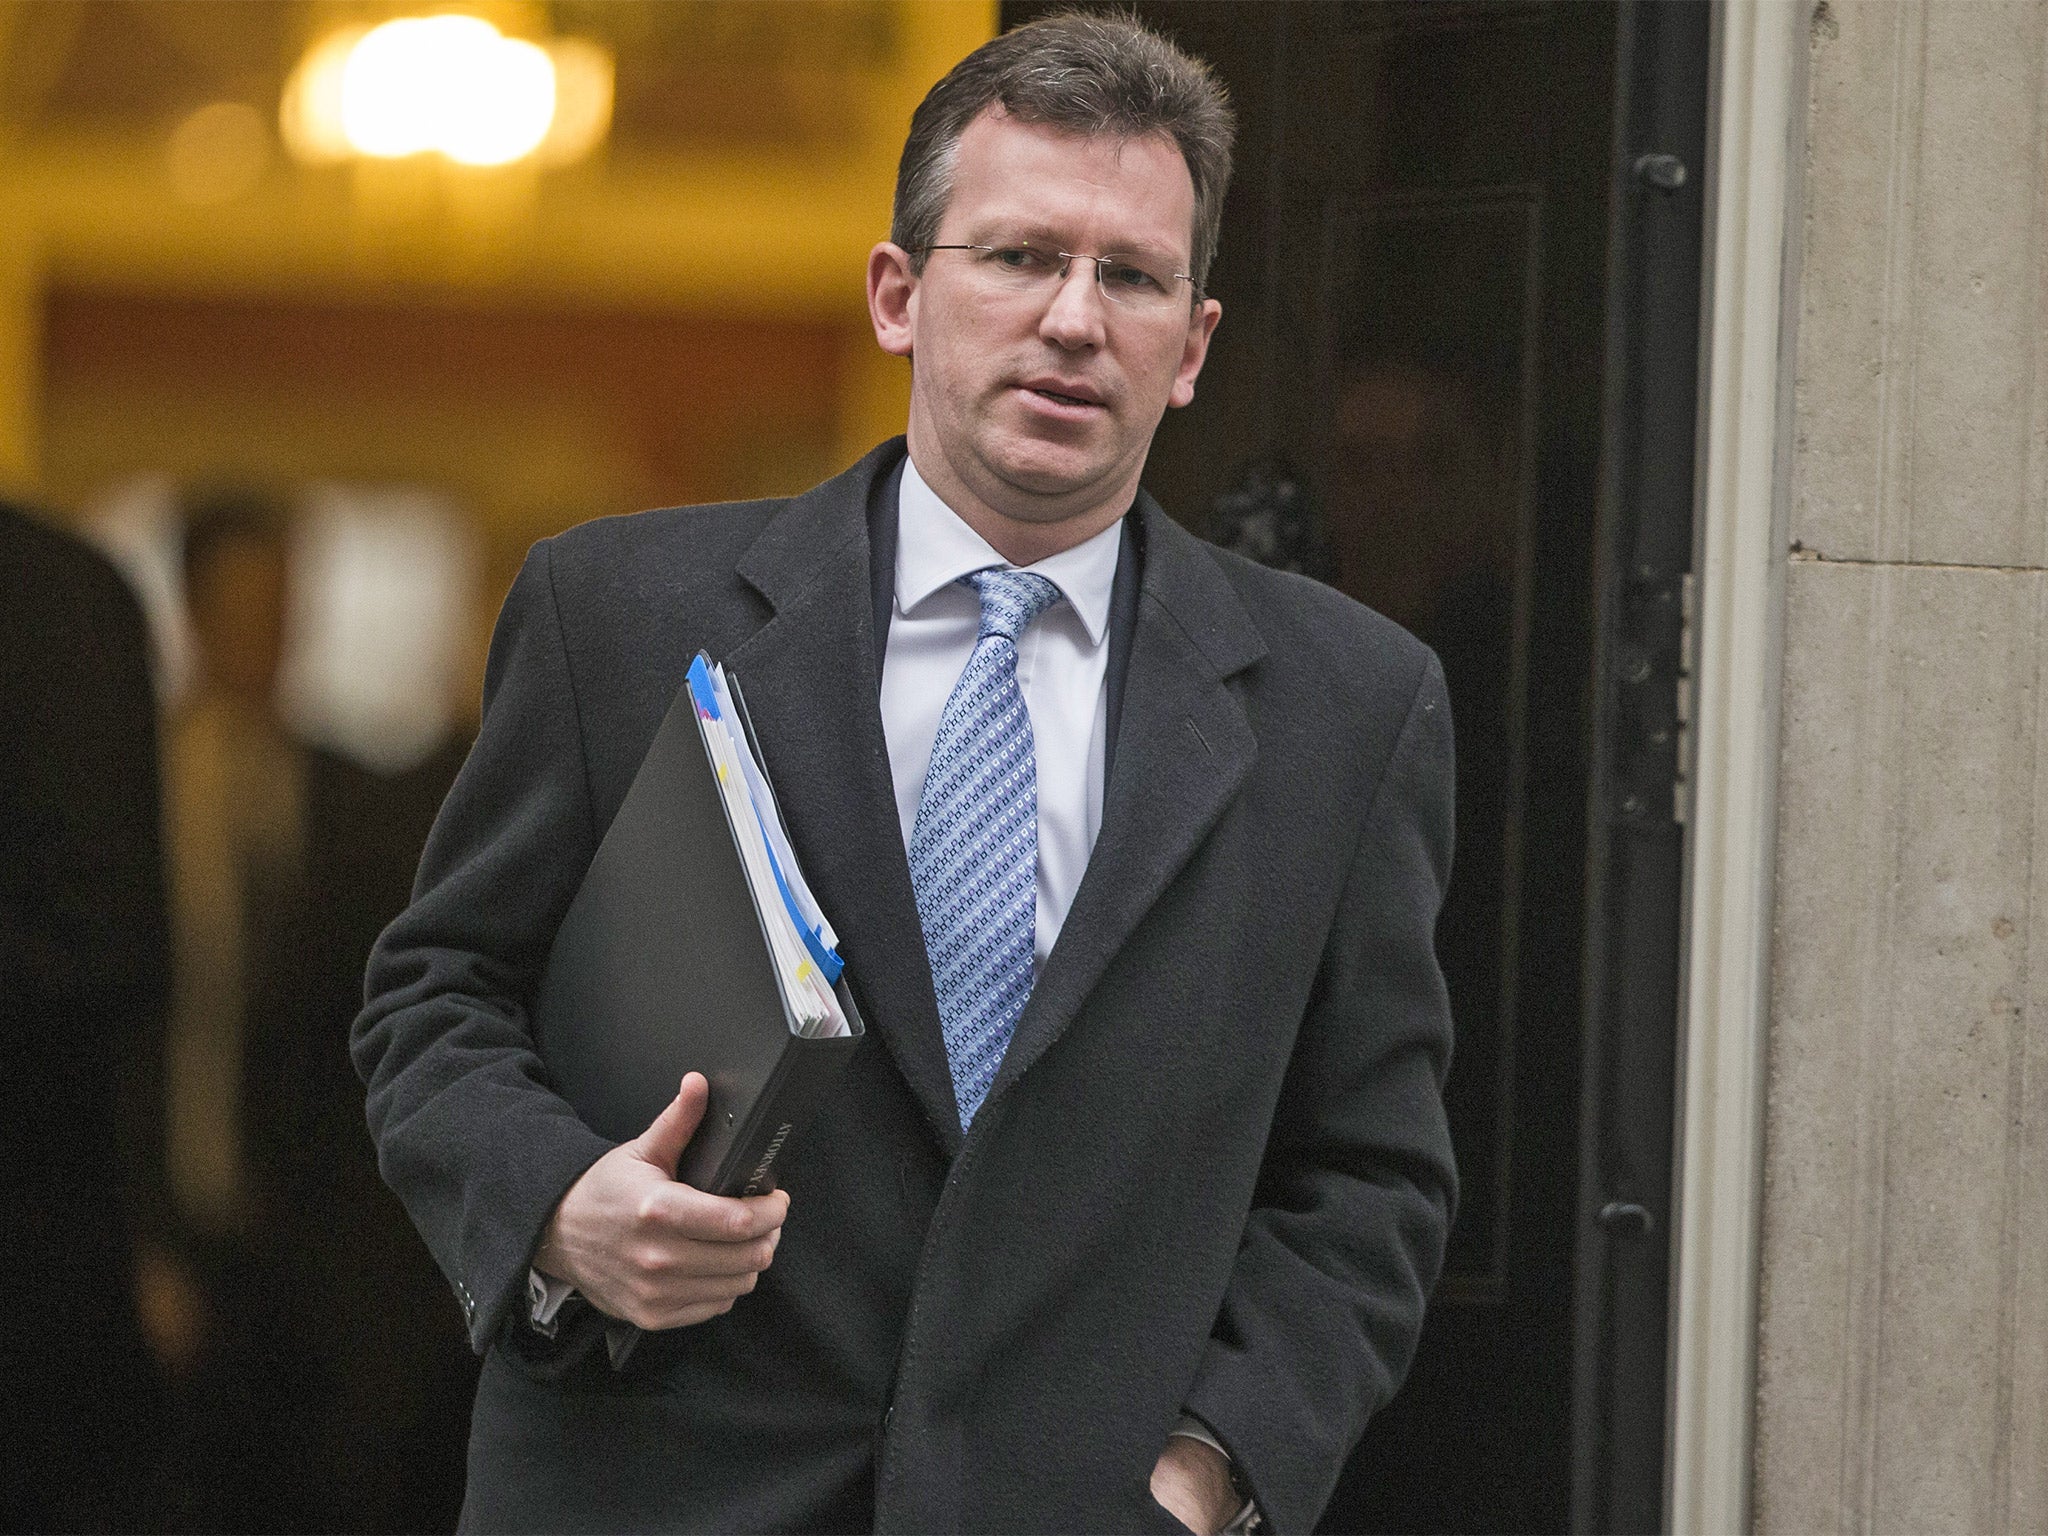 Jeremy Wright leaves 10 Downing Street after a Cabinet meeting in January this year